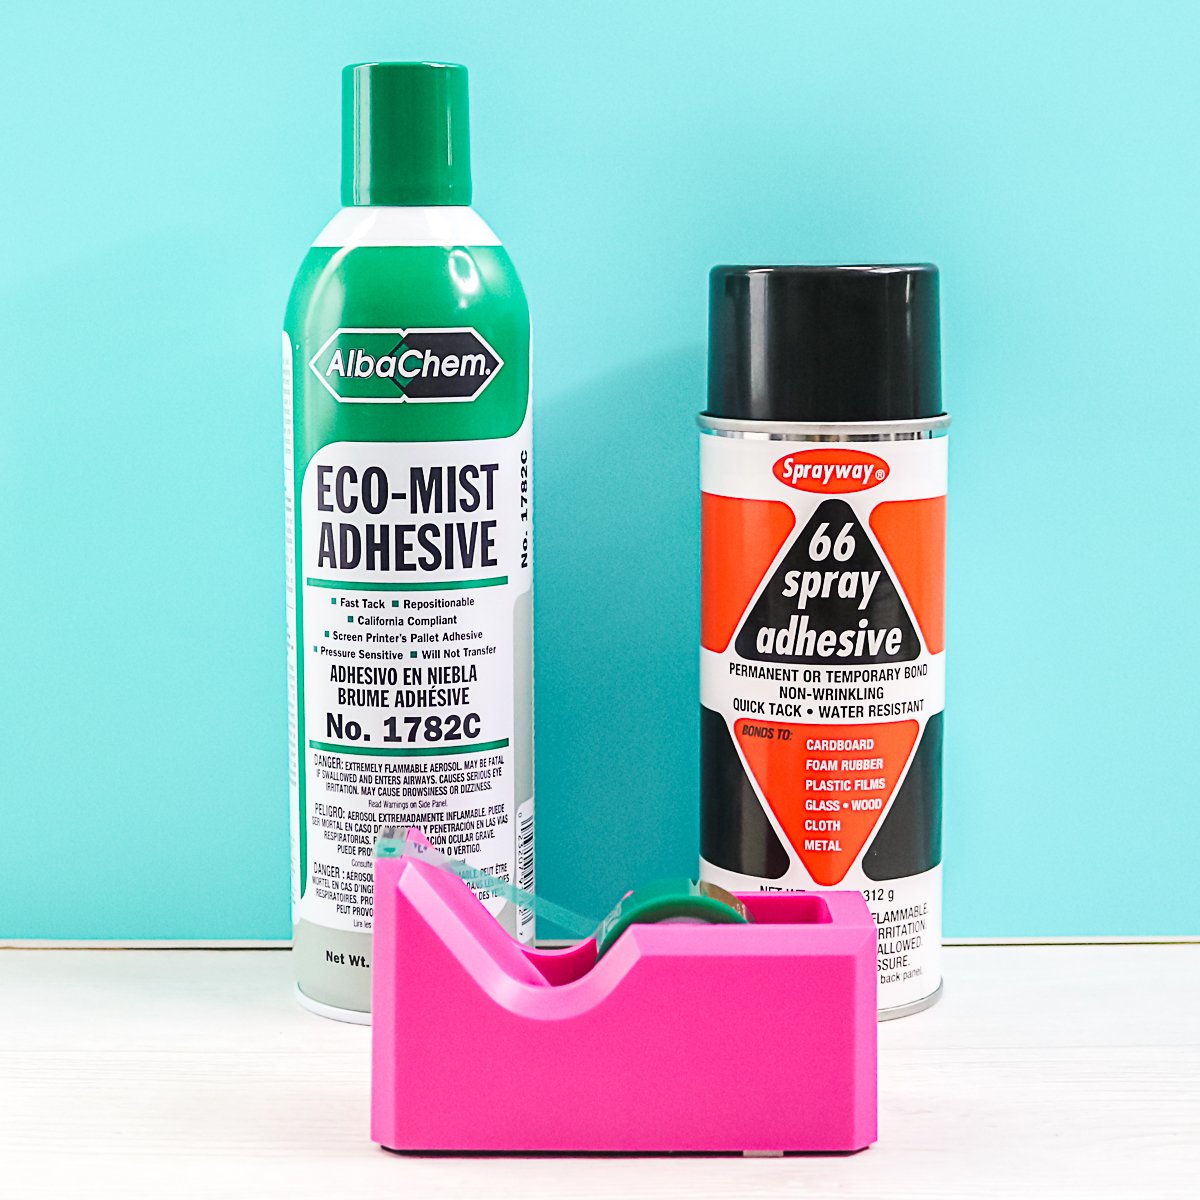 Sublimation Spray Adhesive: How Does it Work? Should You Use It